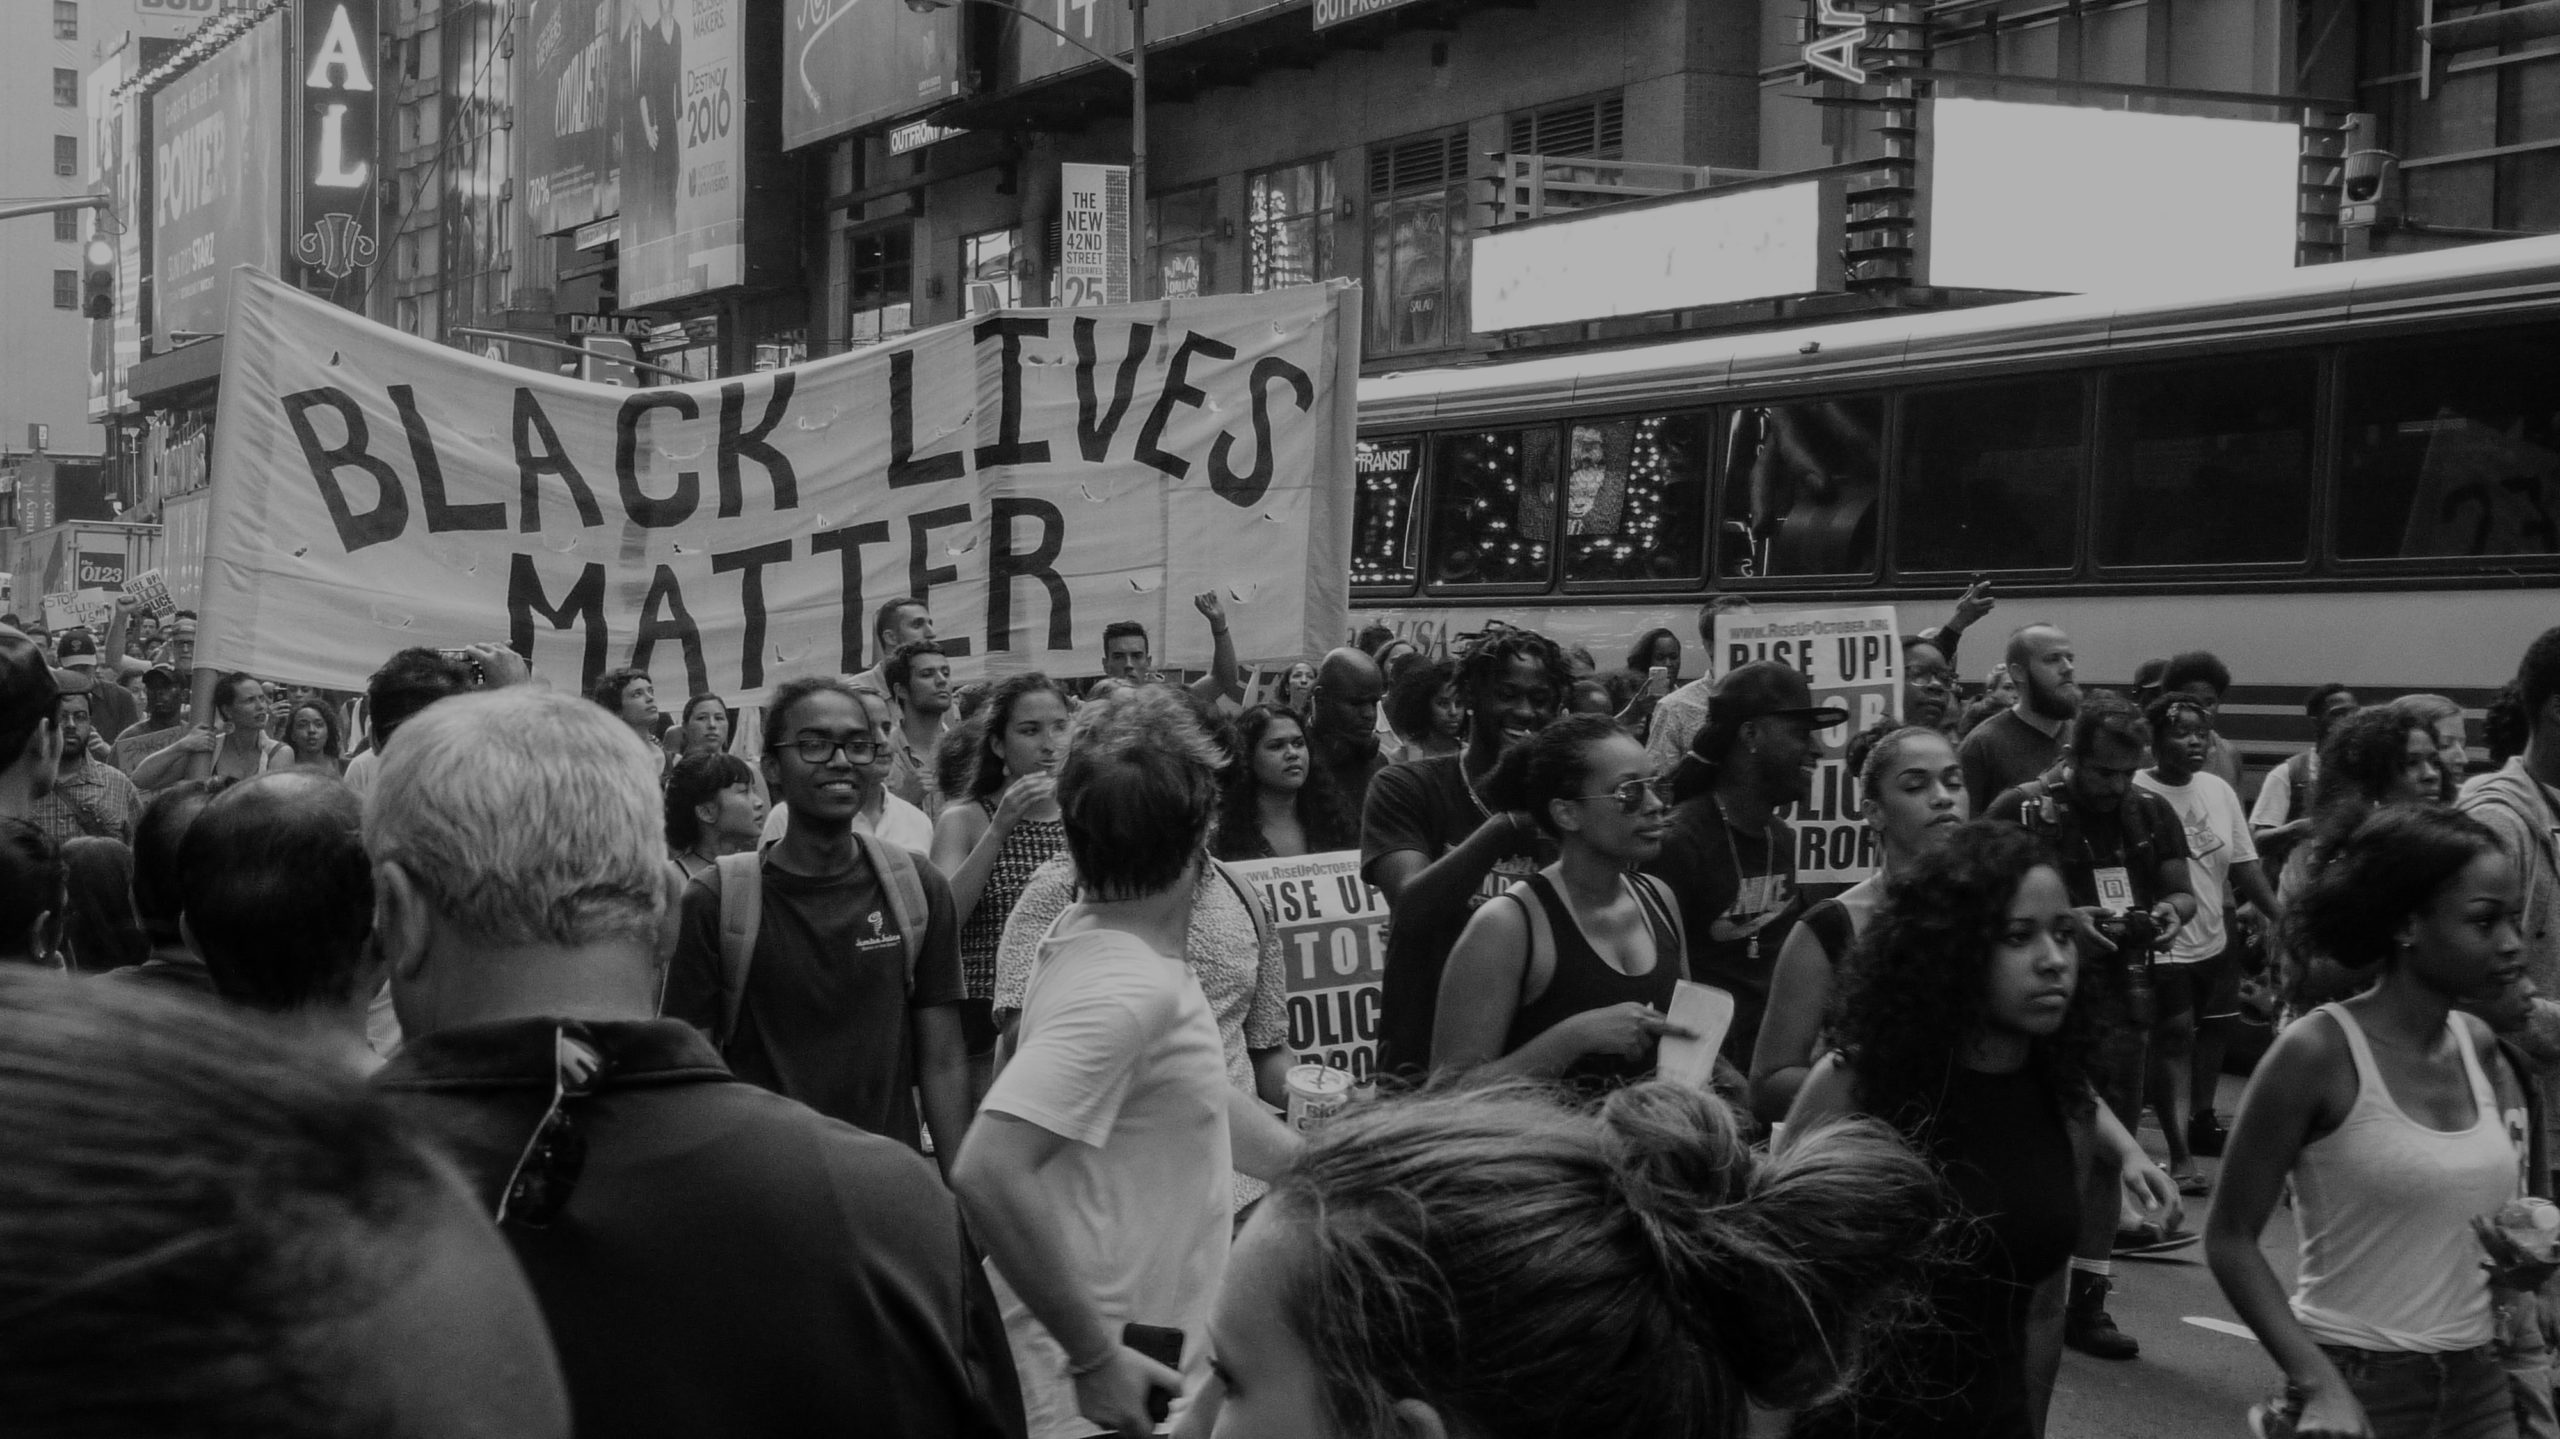 taking action to dismantle systemic injustice